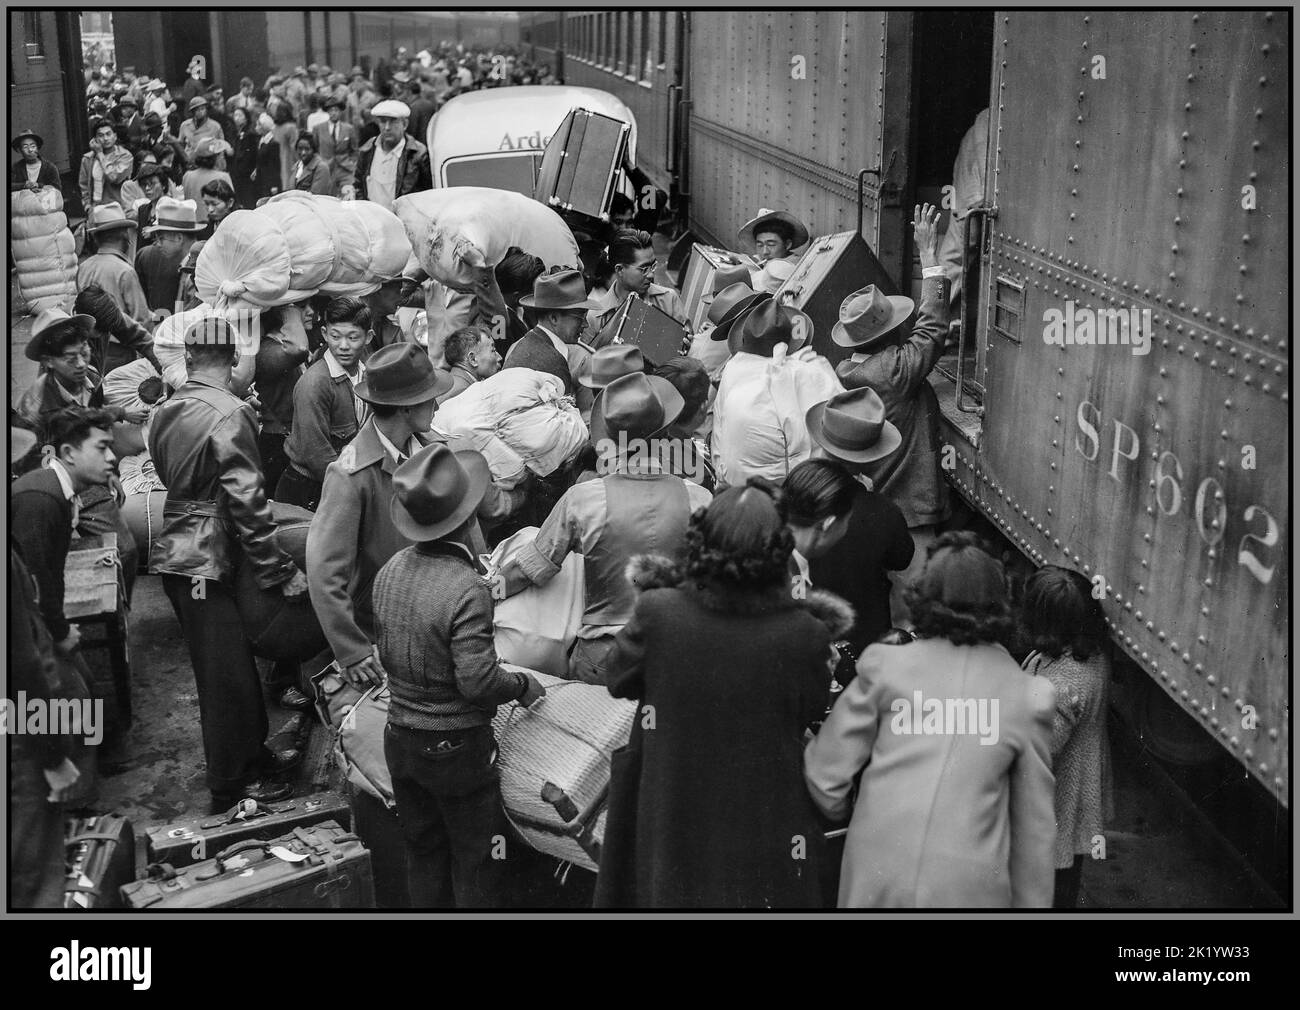 WW2 Japanese residents in the USA being relocated during WW2 Los Angeles, California. Evacuees of Japanese ancestry boarding a train for Manzanar, California, 250 miles away, where they will  now be housed in a War Relocation Authority center. Date between 1942 and 1945 Stock Photo